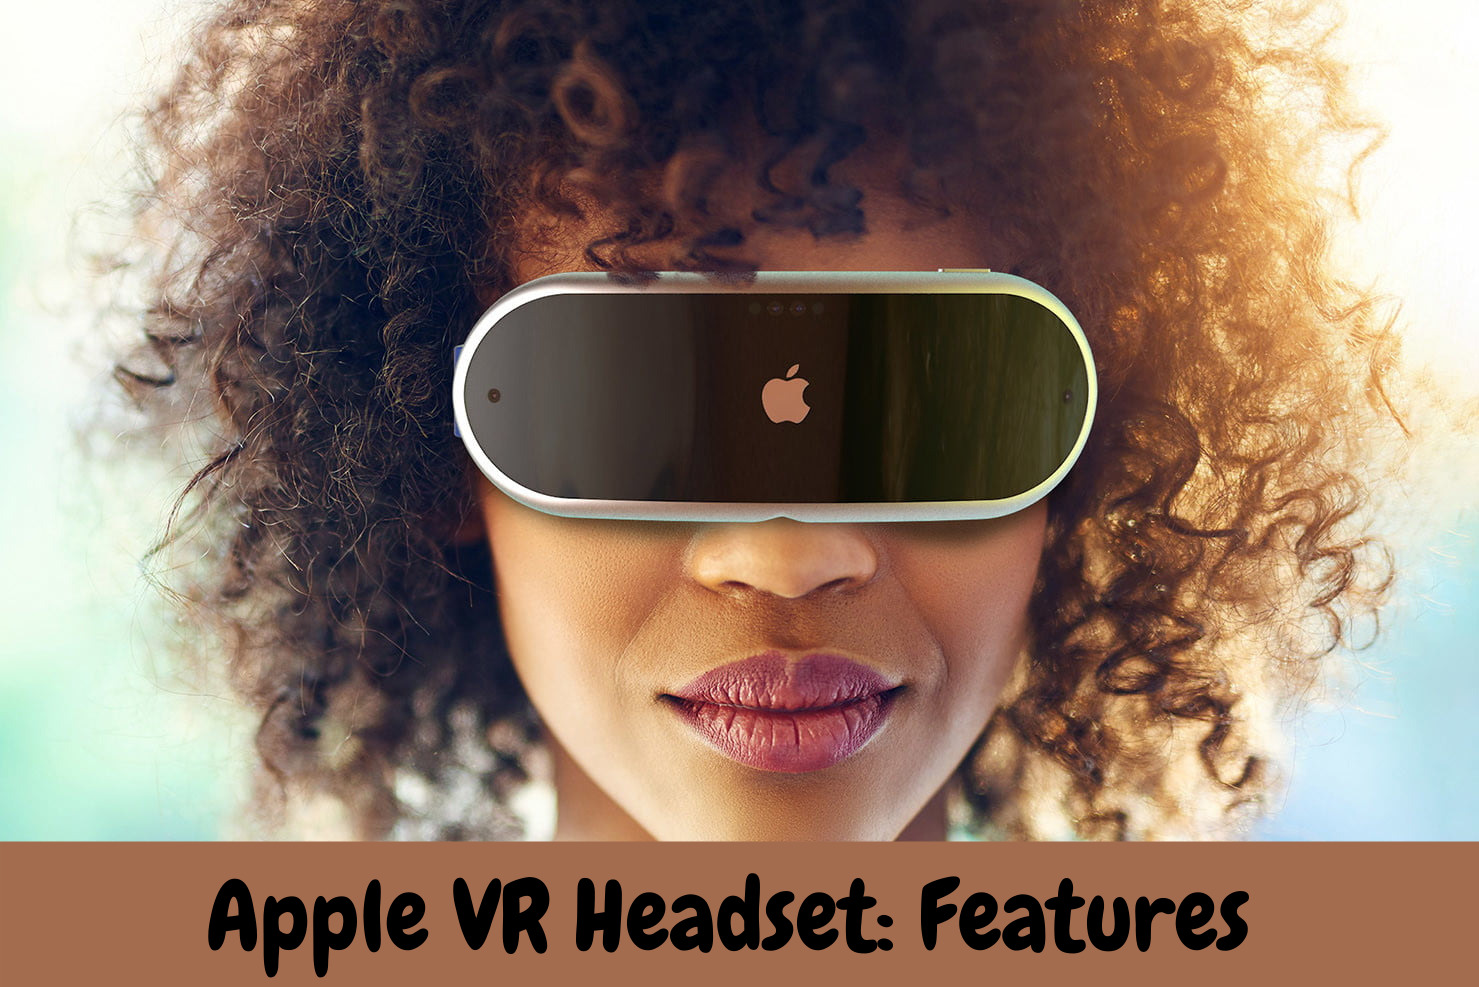 Apple VR Headset: Features 